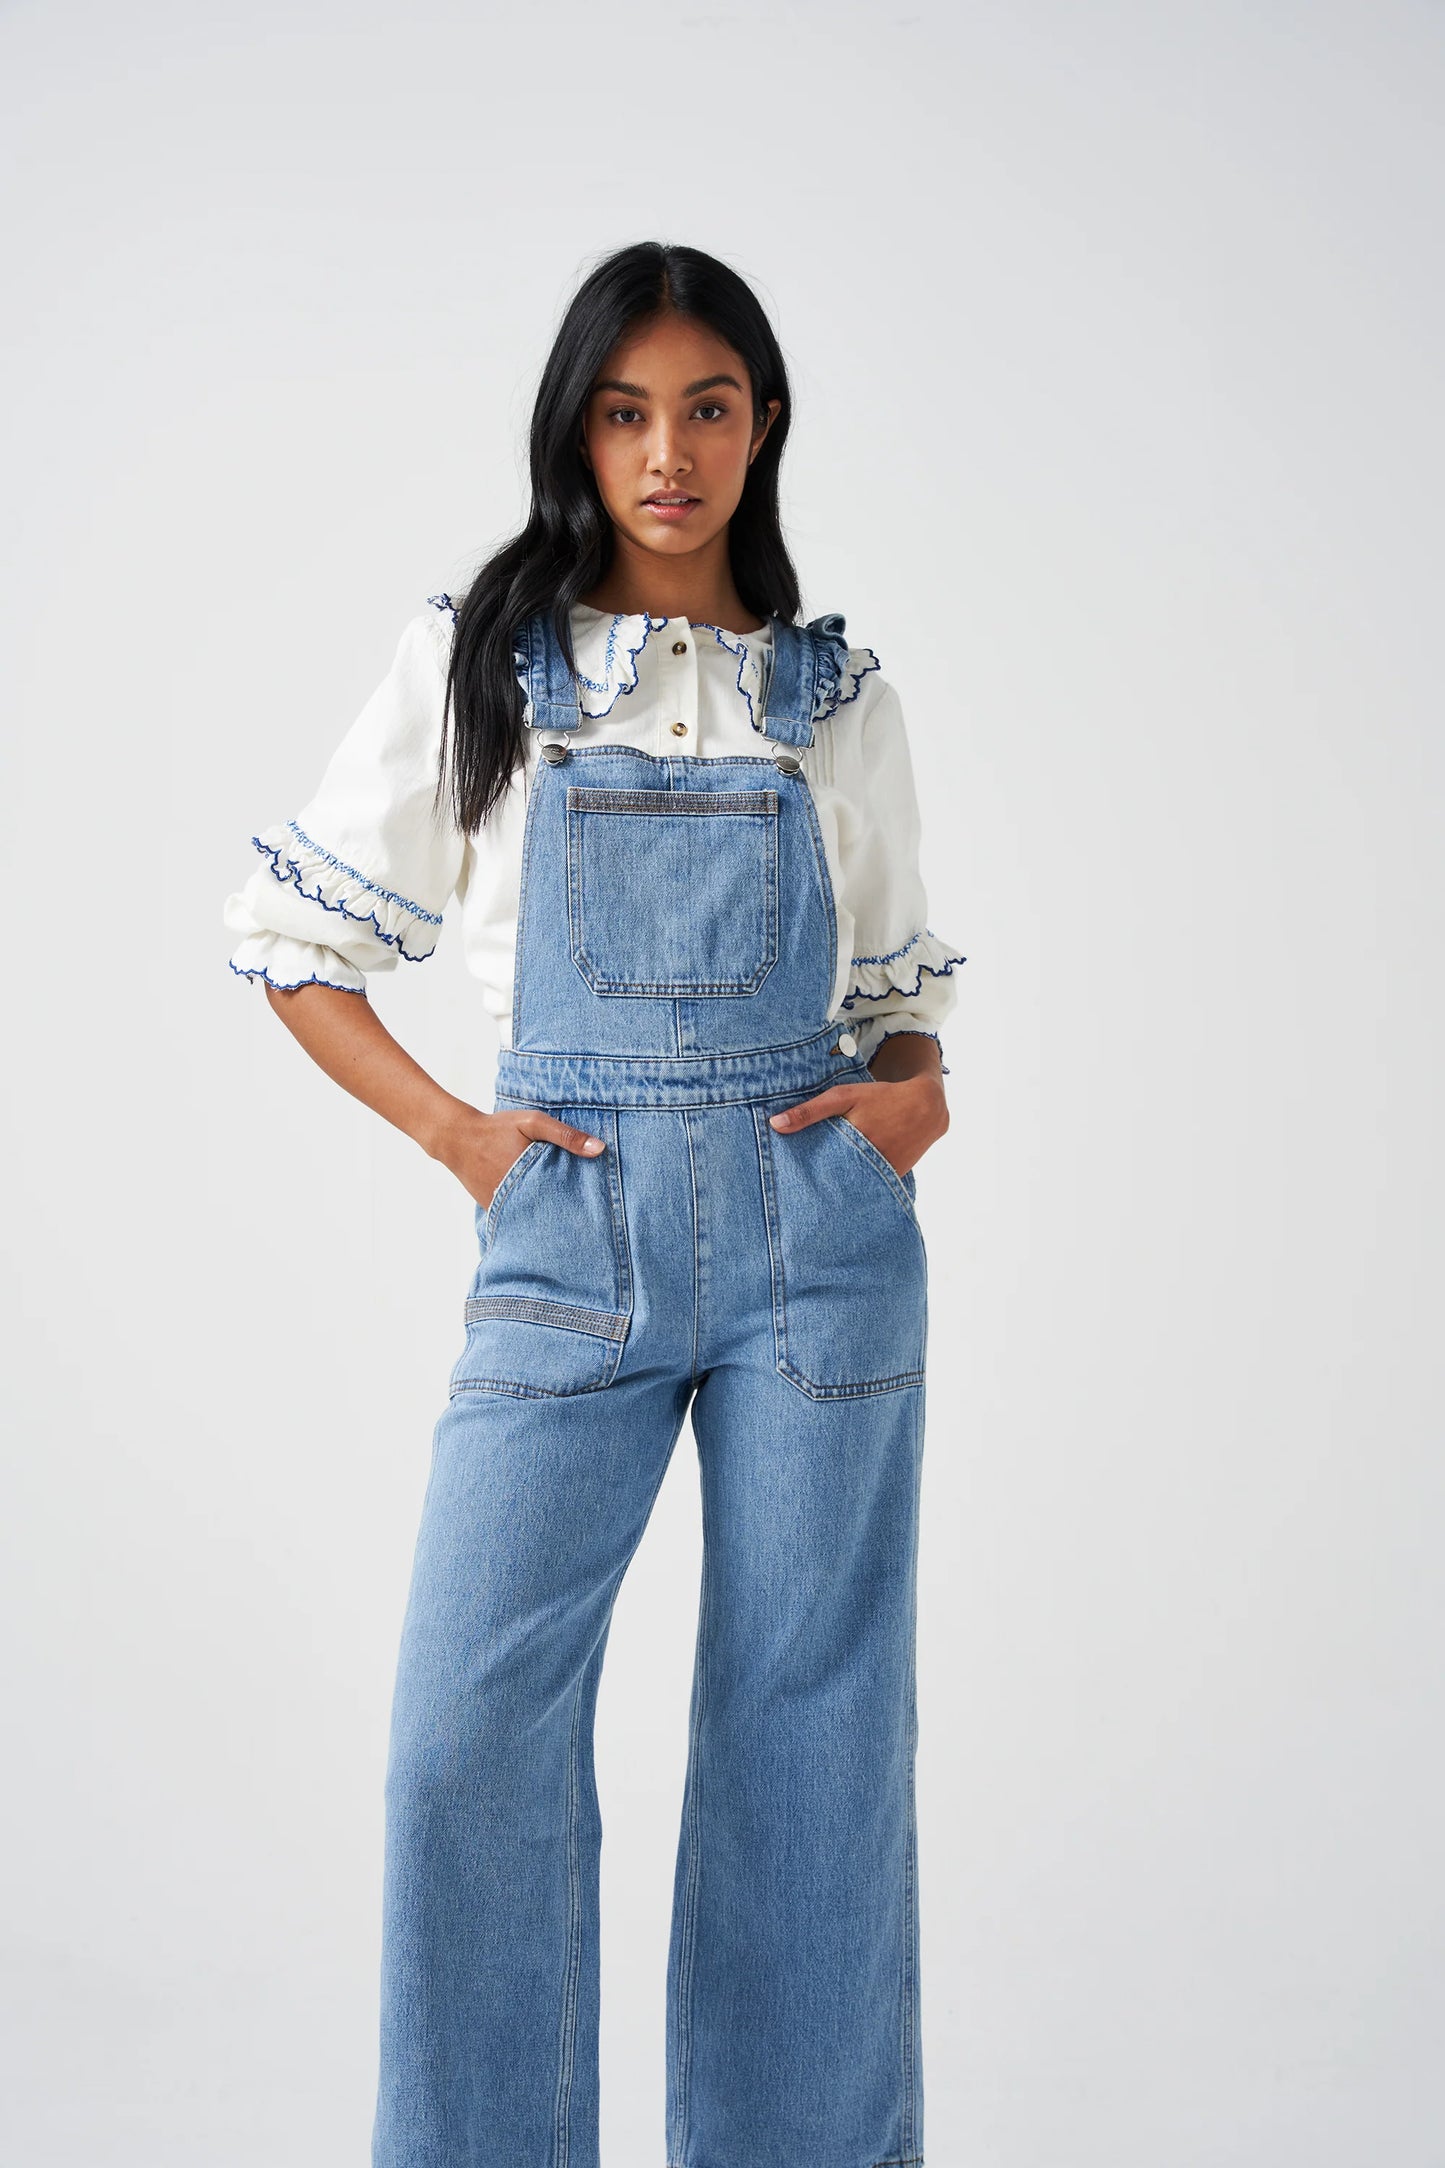 Elodie Frill Dungaree Rodeo Vintage